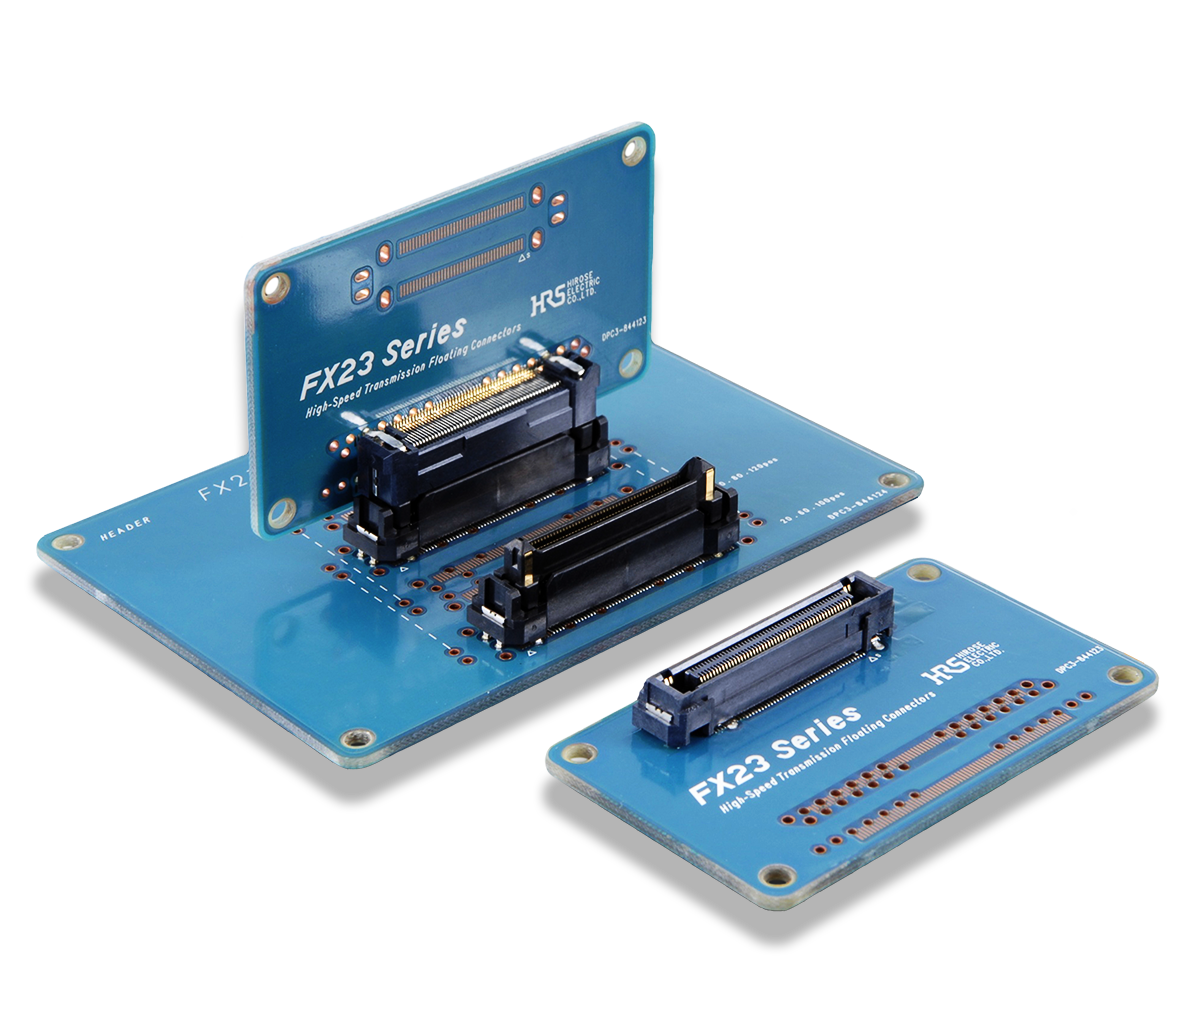 Image of Hirose's FX23 Series: High-speed 8+ Gbps board-to-board connector with hybrid power